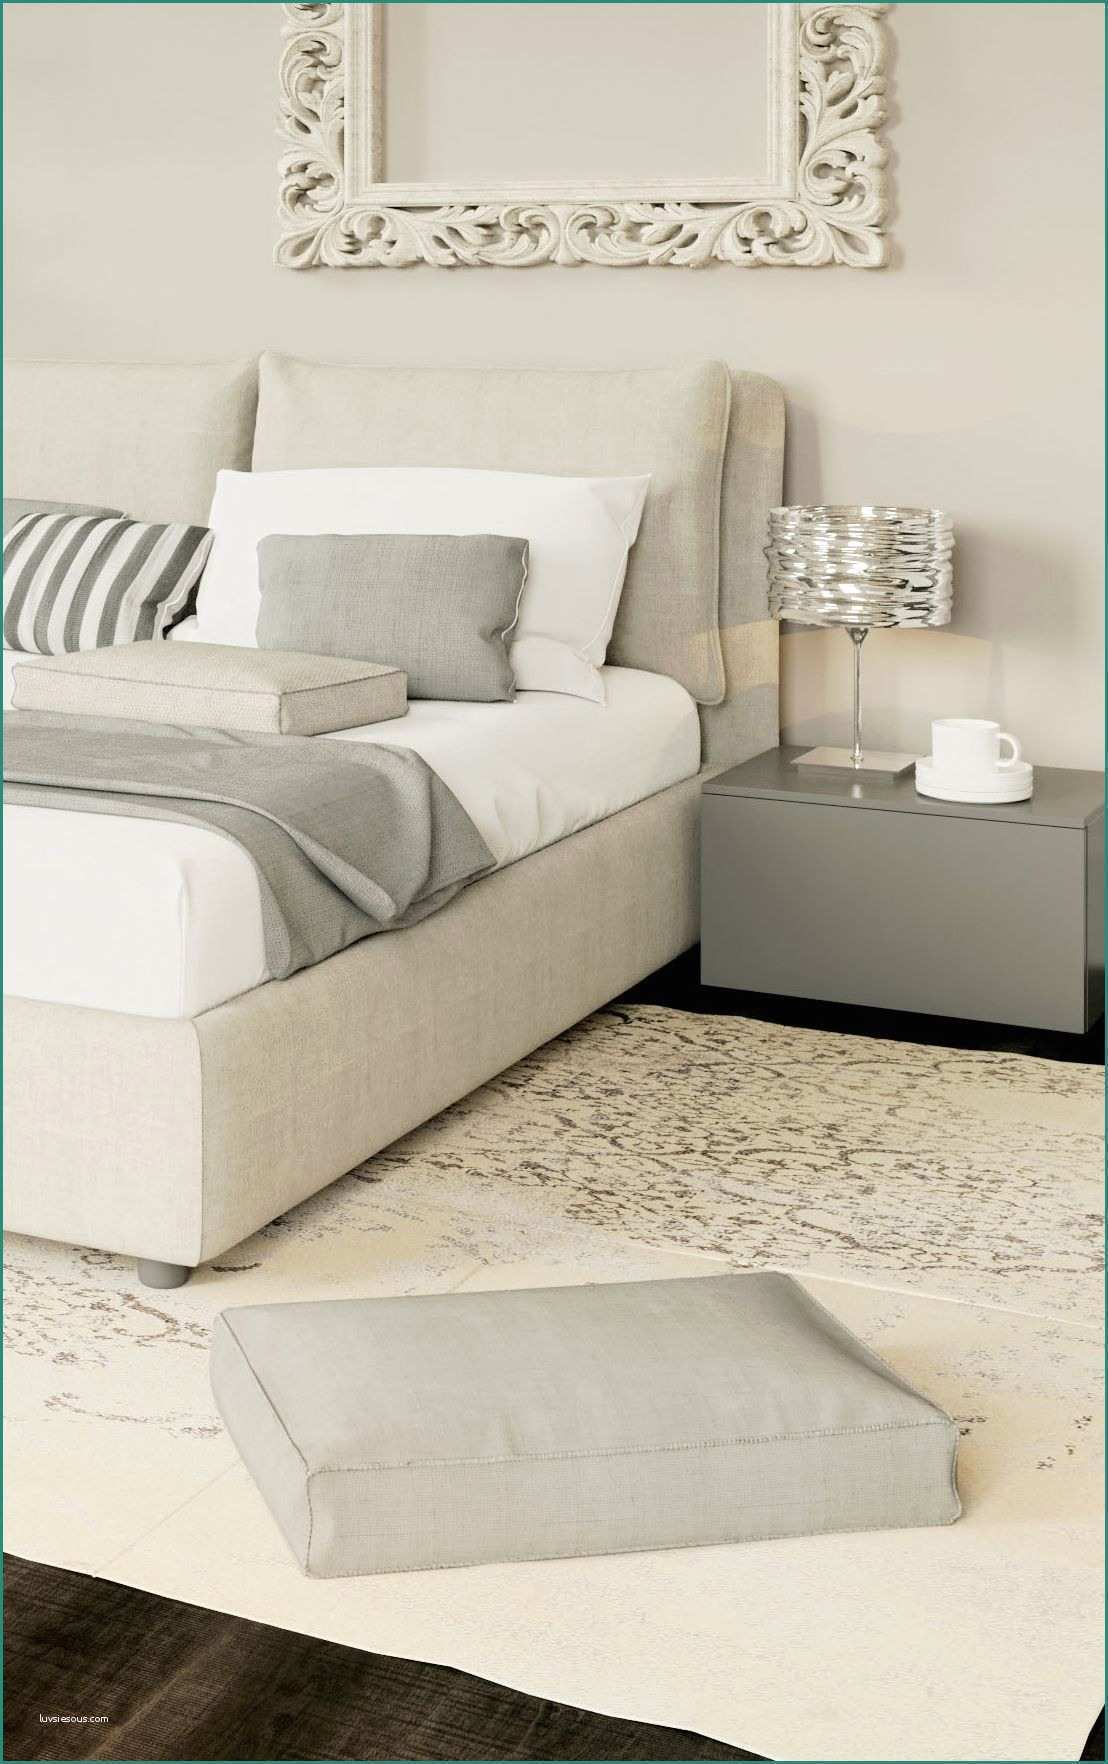 Letto Matrimoniale Ad Angolo E Luxury Details Grey and White Lacasamoderna Beds Sweetdreams